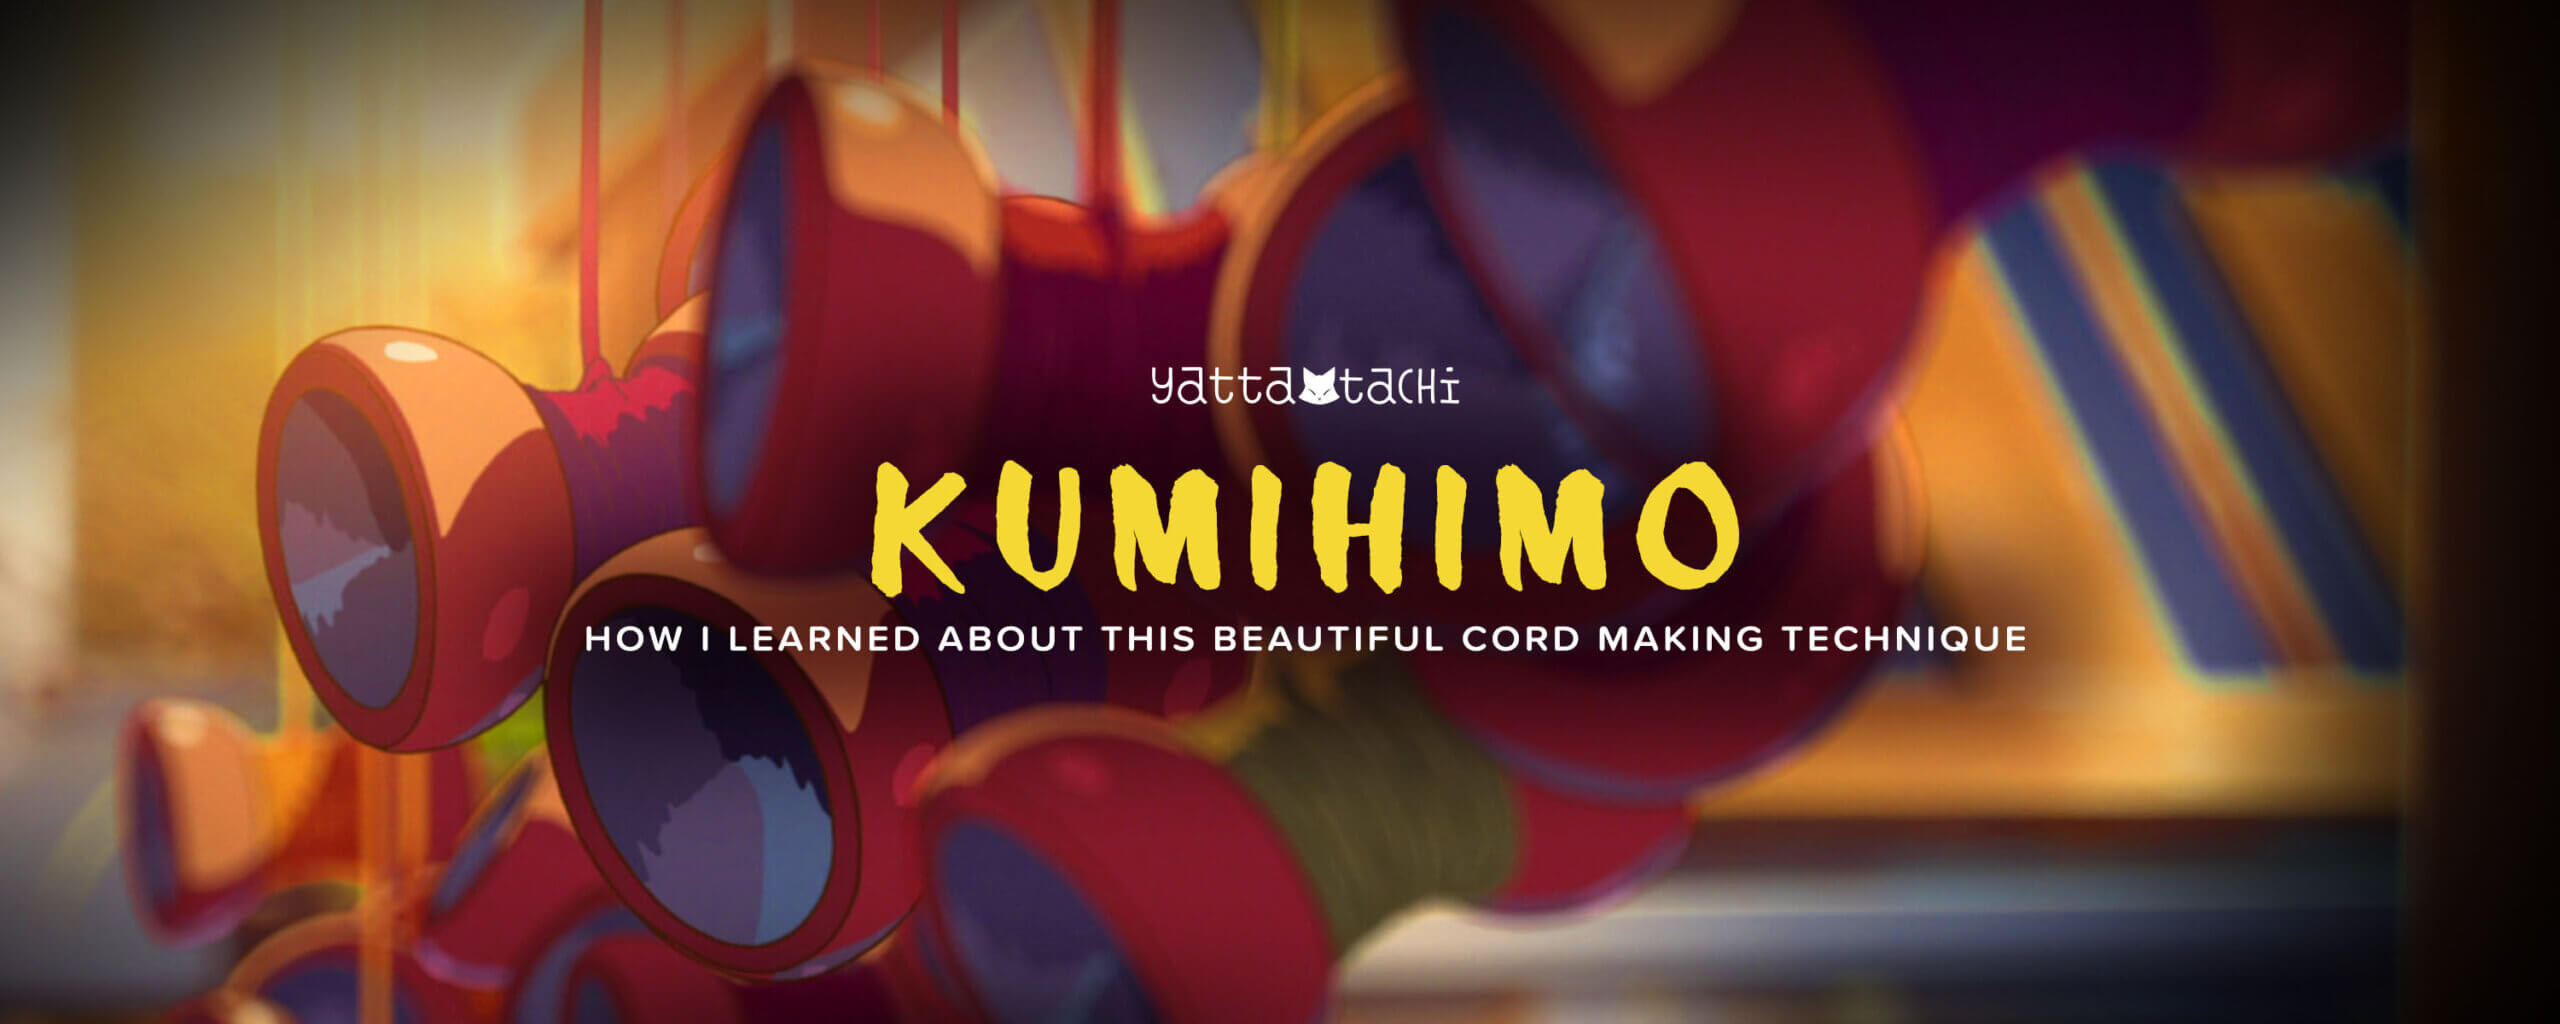 Kumihimo: How I Learned About This Beautiful Cord Making Technique